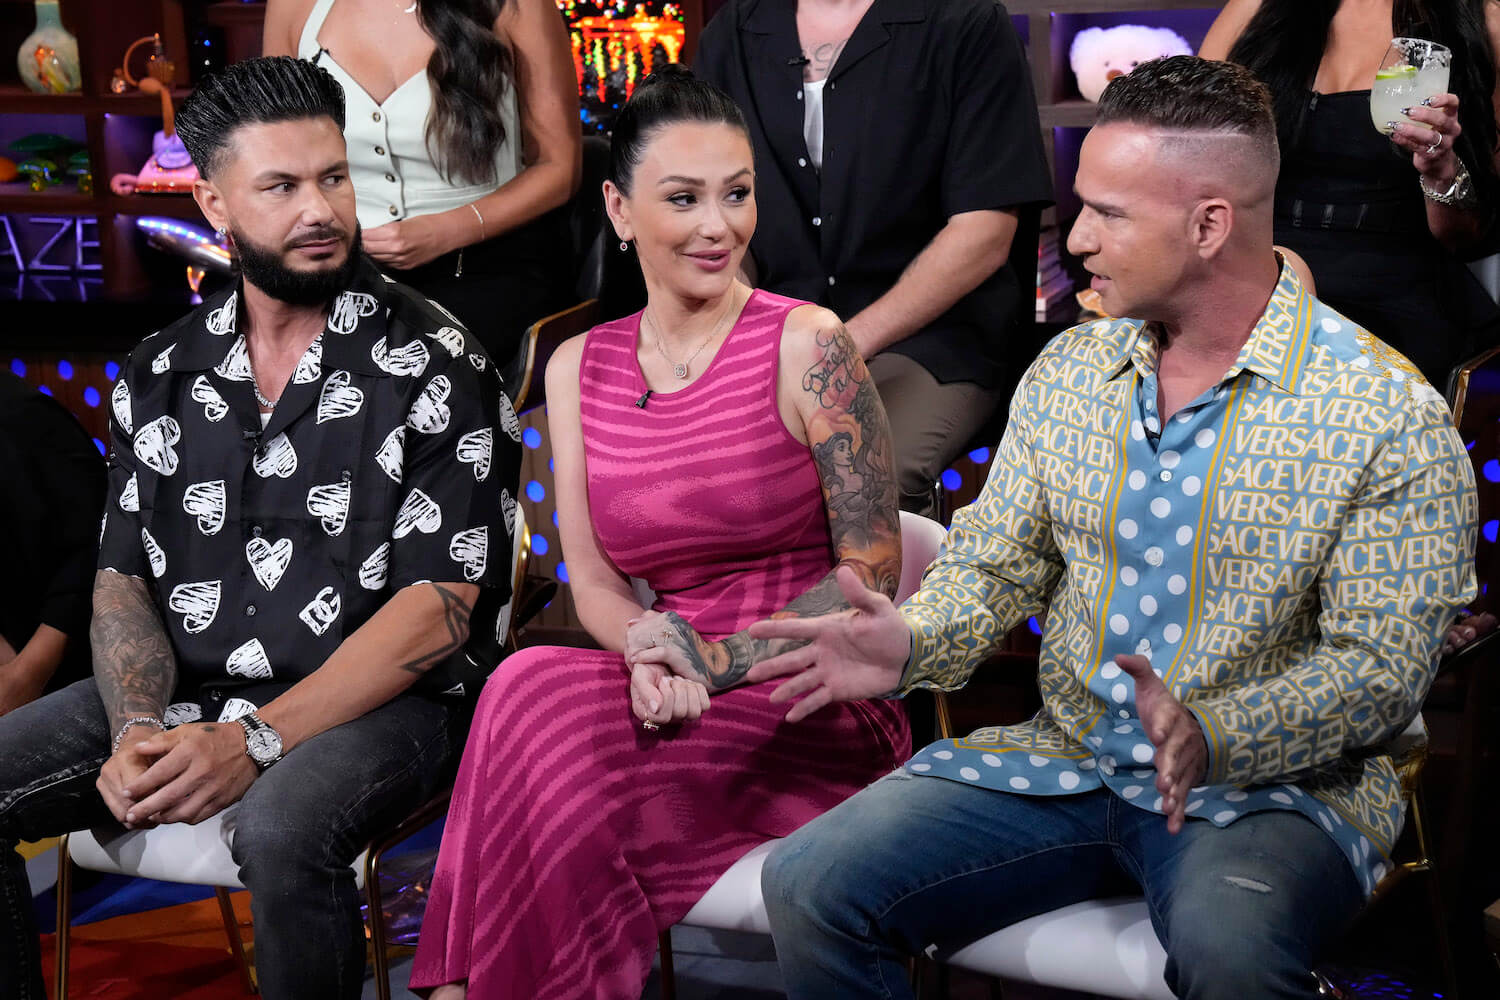 'Jersey Shore' stars Paul 'DJ Pauly D' Delvecchio, Jenni 'JWoww' Farley, and Mike 'The Situation' Sorrentino talking to each other on 'Watch What Happens Live'